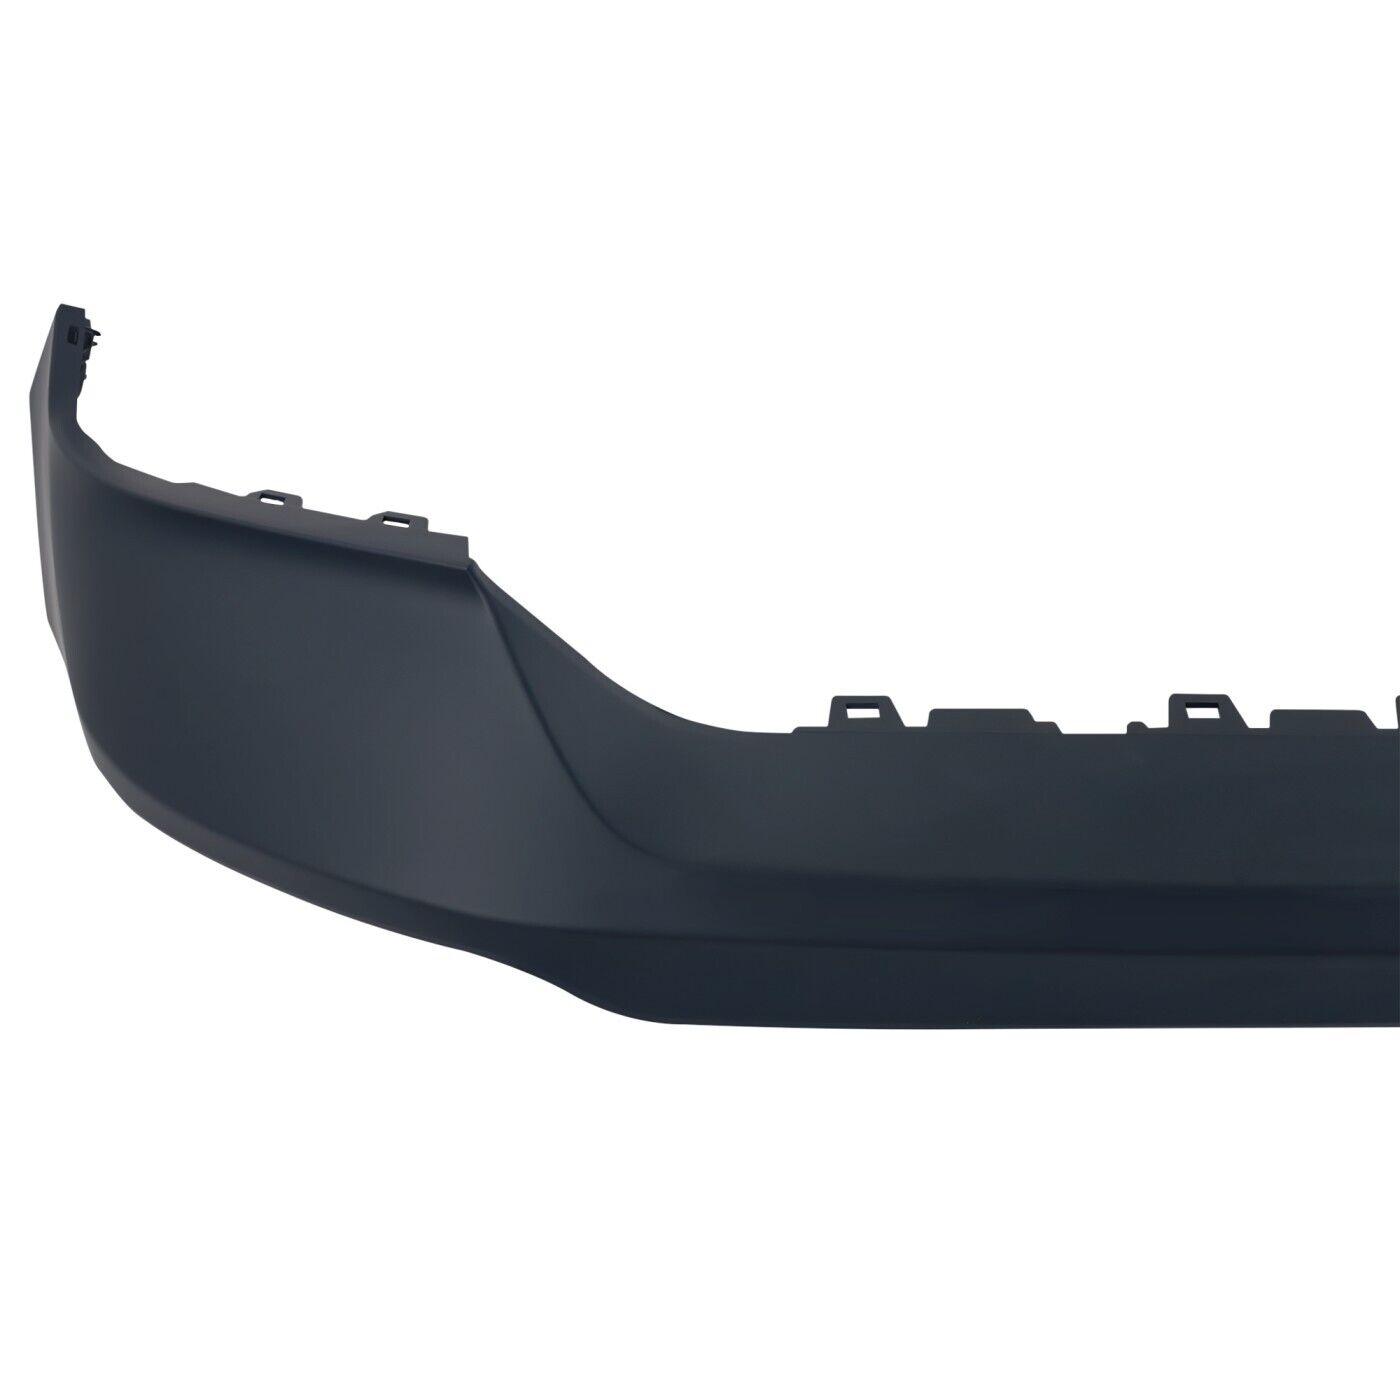 2013-2018 Dodge Ram; Front Bumper Cover upper; TOP PAD 2PC Bumper Painted to Match